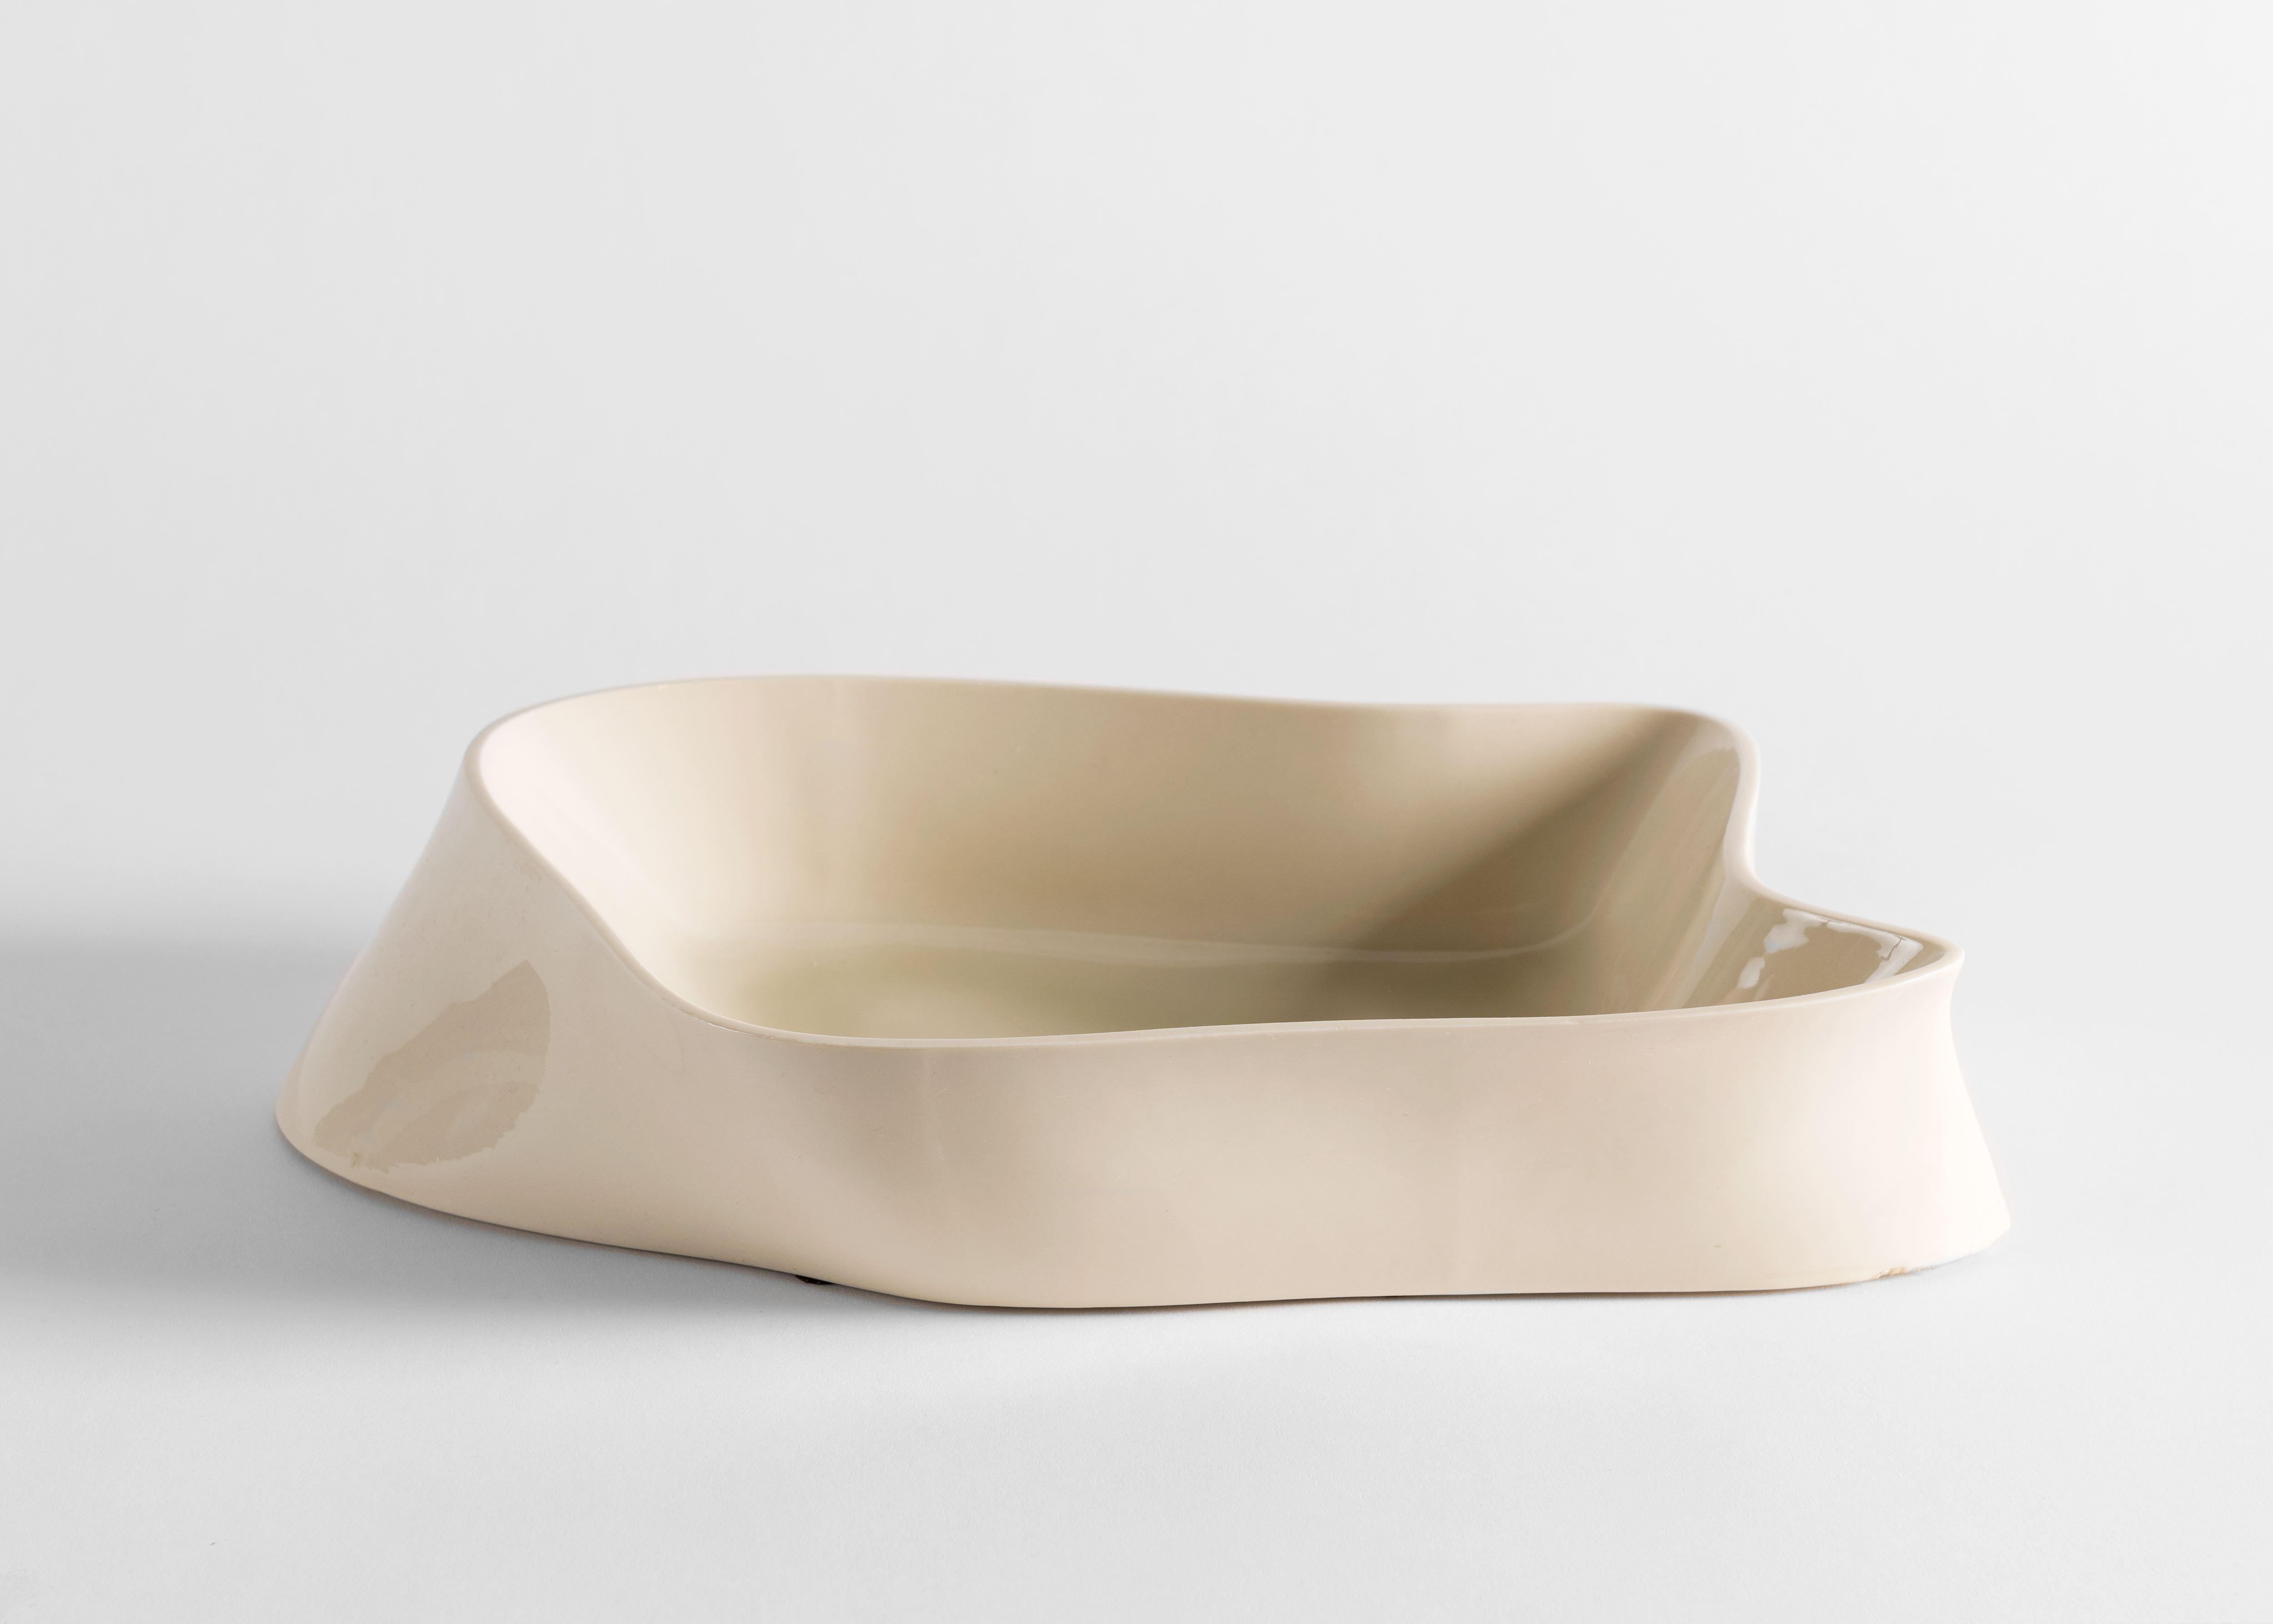 A vessel extraordinary not merely for its milky glaze and consummate utility, but its impressive amorphous shape. With the vessel's form Fanning has solidified a shape typically ephemeral and practically singular to liquids.